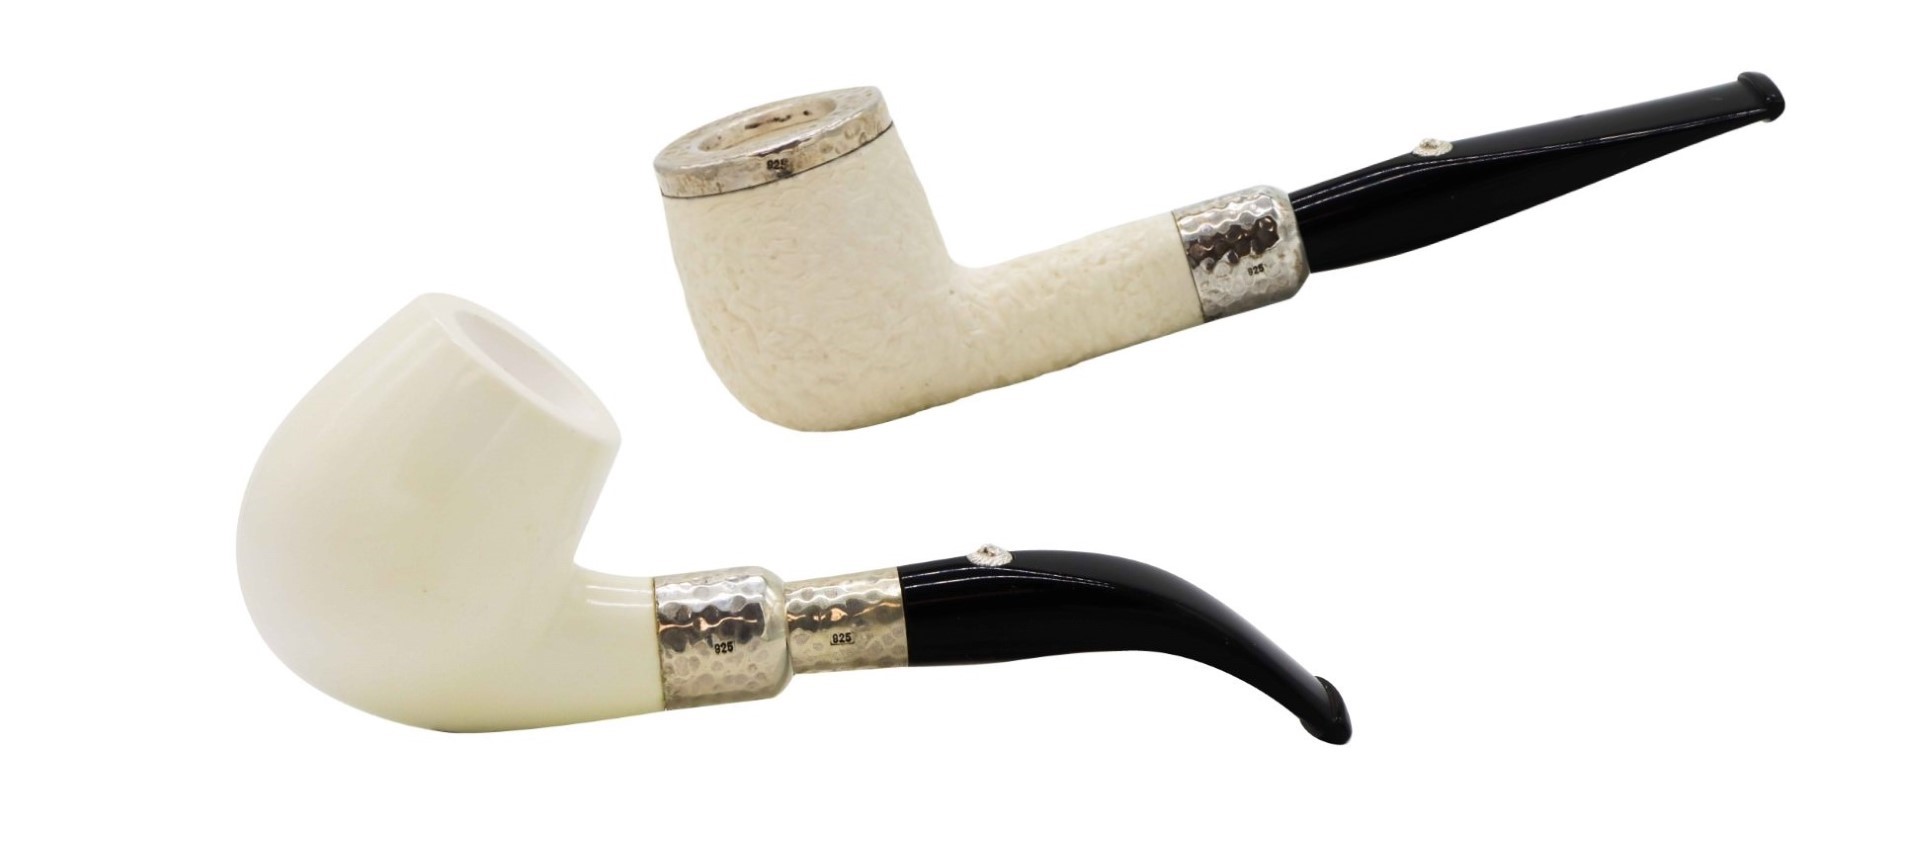 Barling Ivory Meerschaum tobacco Pipes